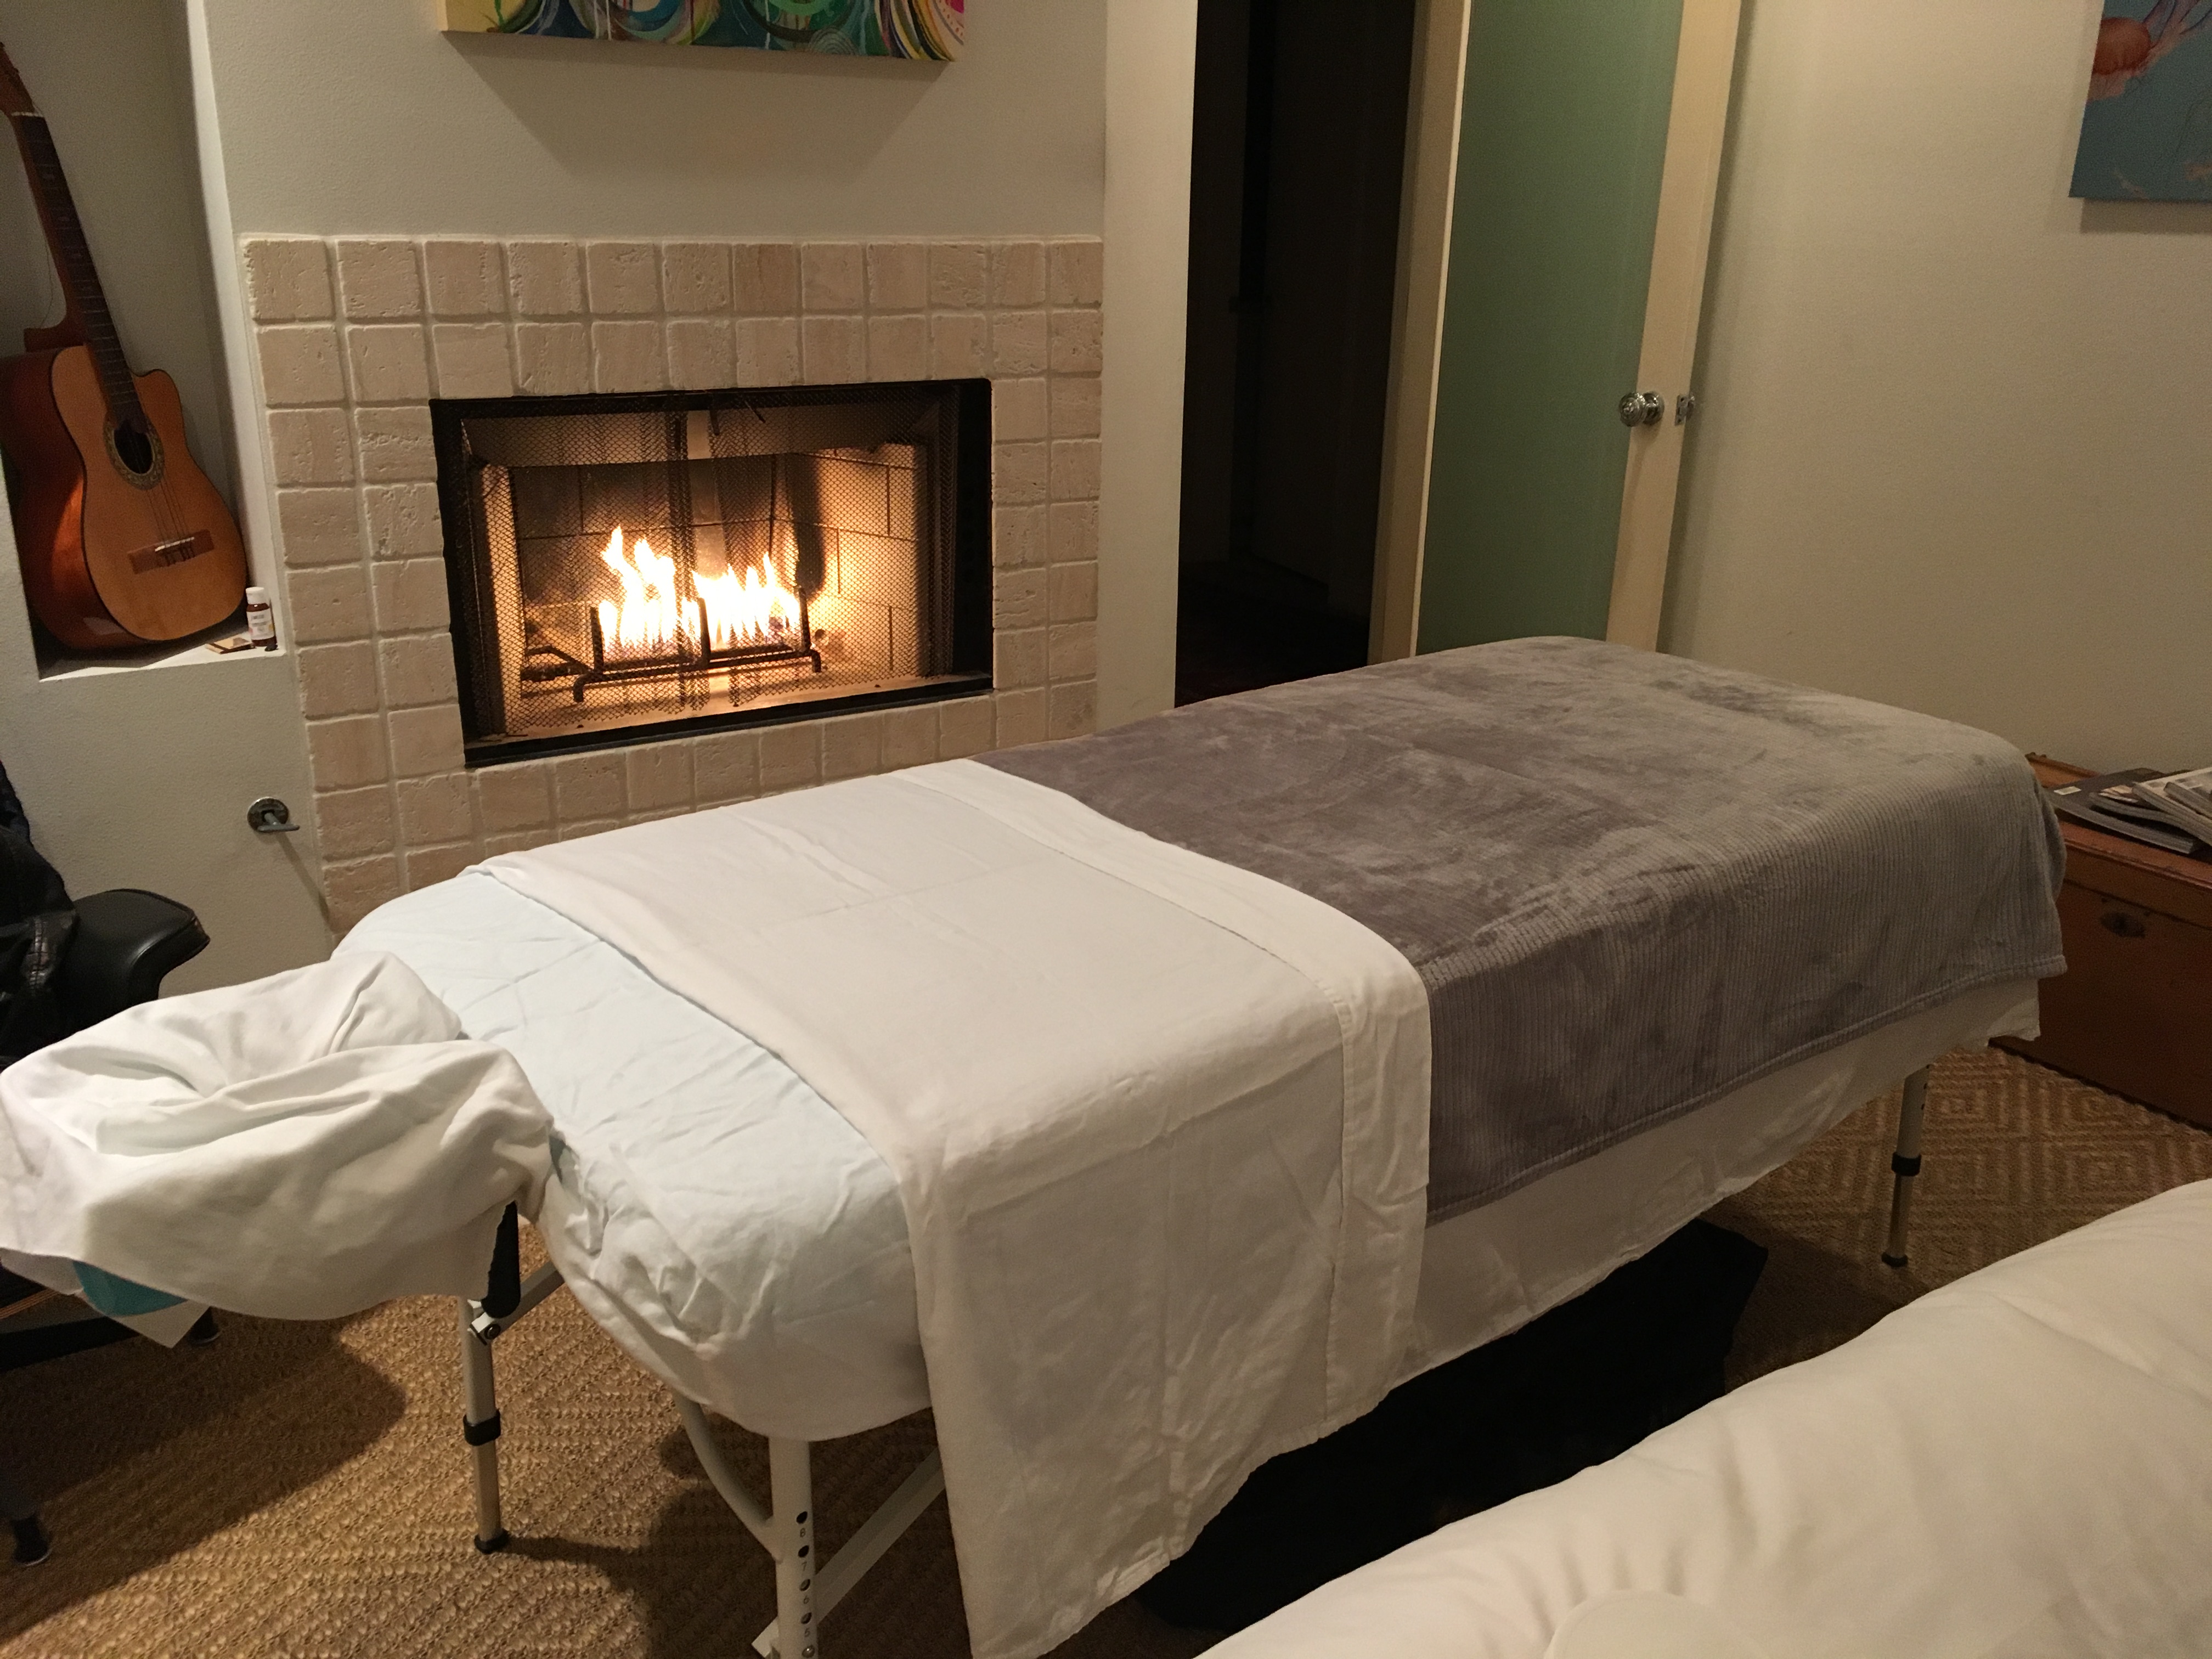 mobile-massage-table-at-home-fireplace